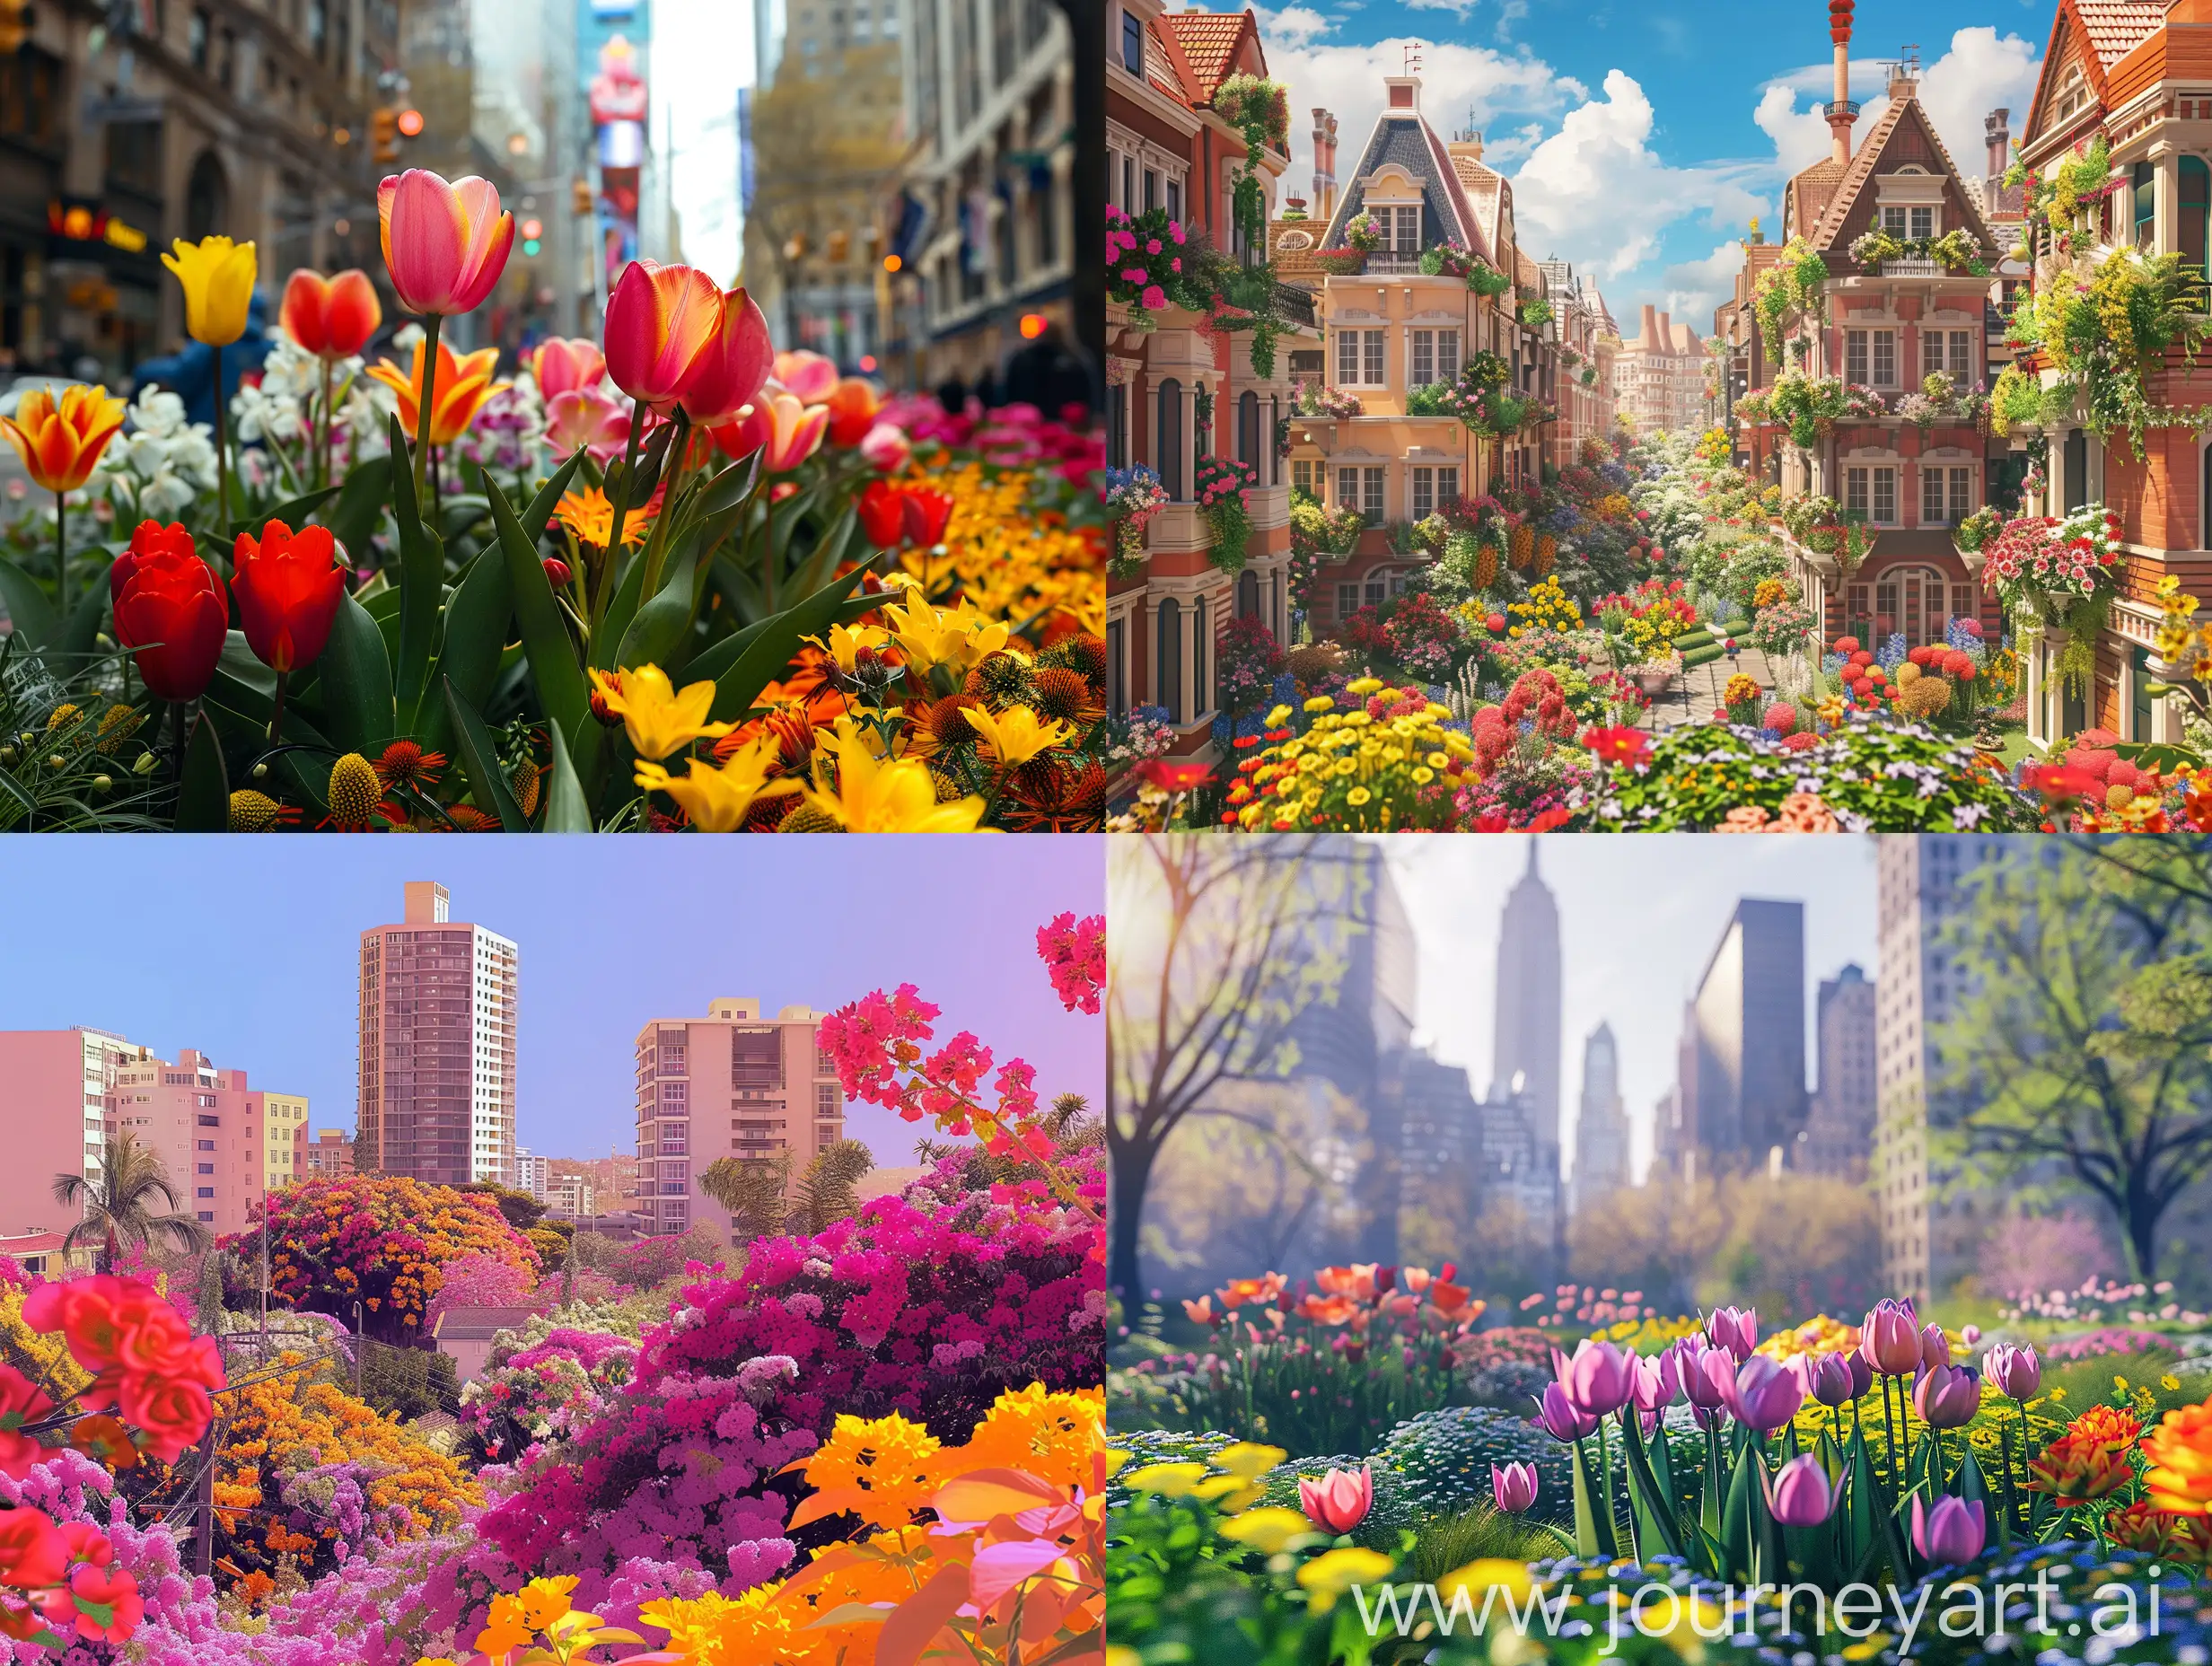 A city full of flowers